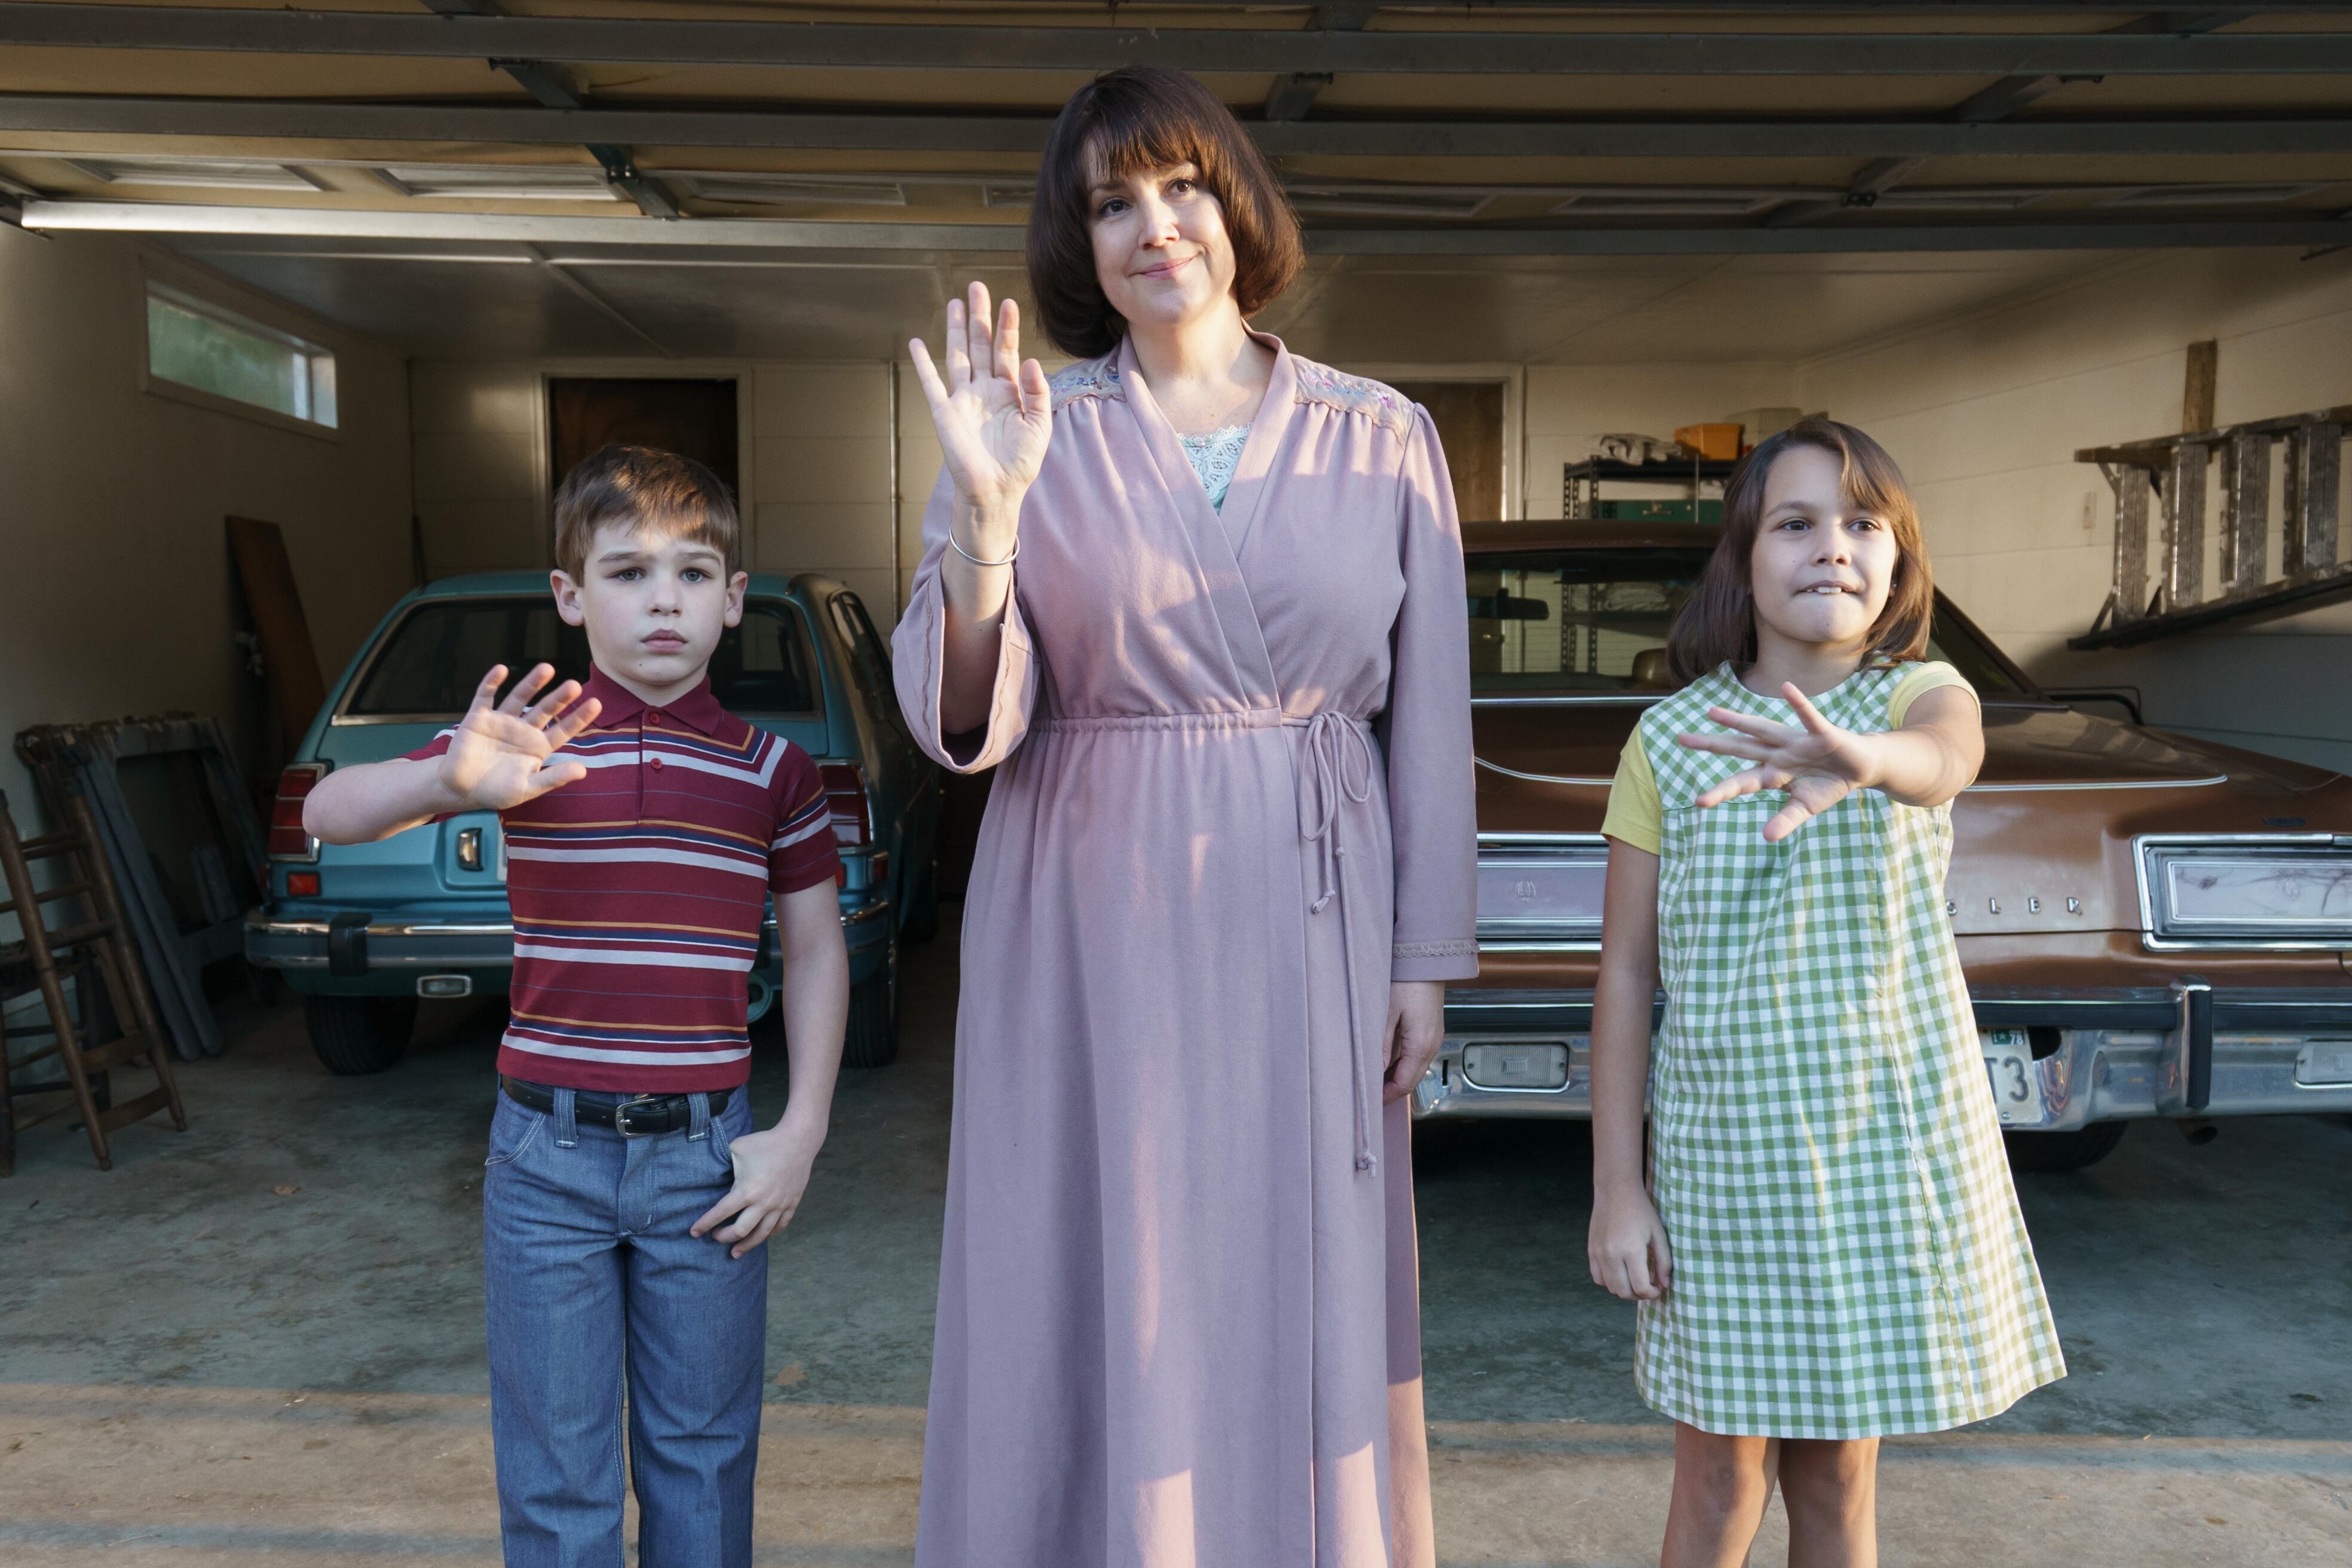 'Candy' cast members Hudson Hughes and Antonella Rose acting as Betty Gore's children standing on either side of Melanie Lynskey waving